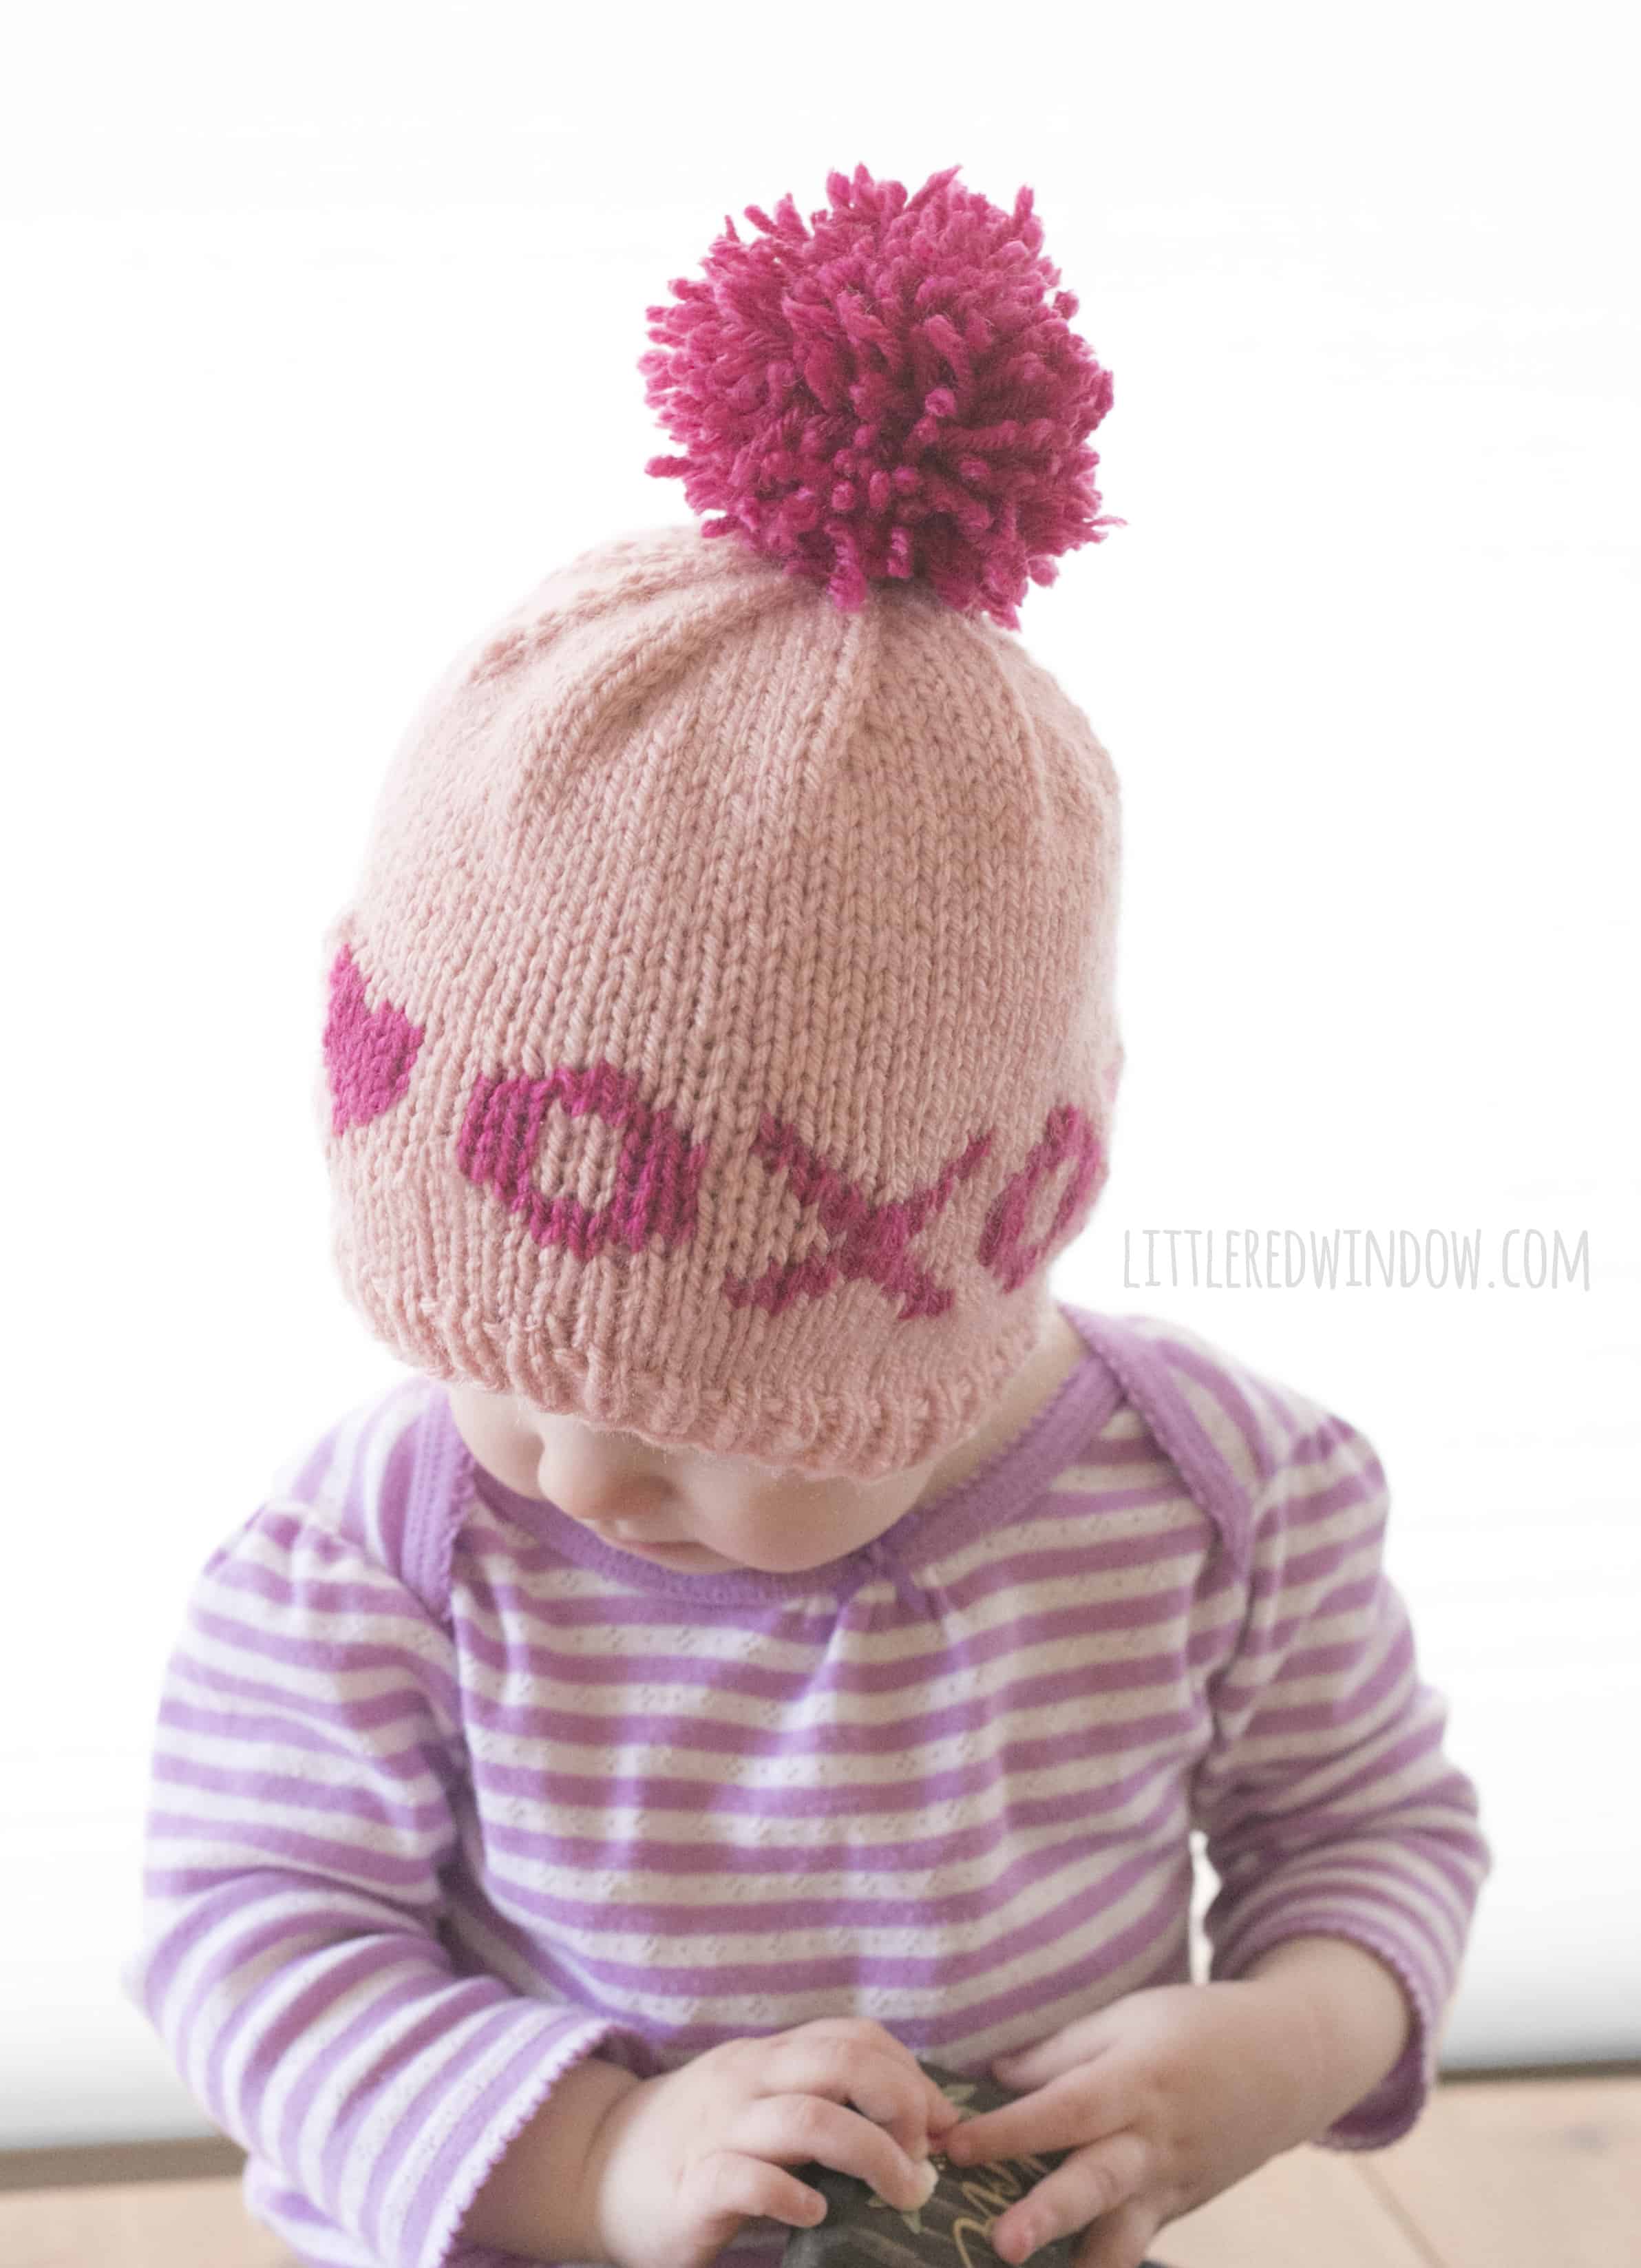 Fair Isle XOXO Hugs & Kisses Valentine Knitting Pattern for babies and toddlers! | littleredwindow.com